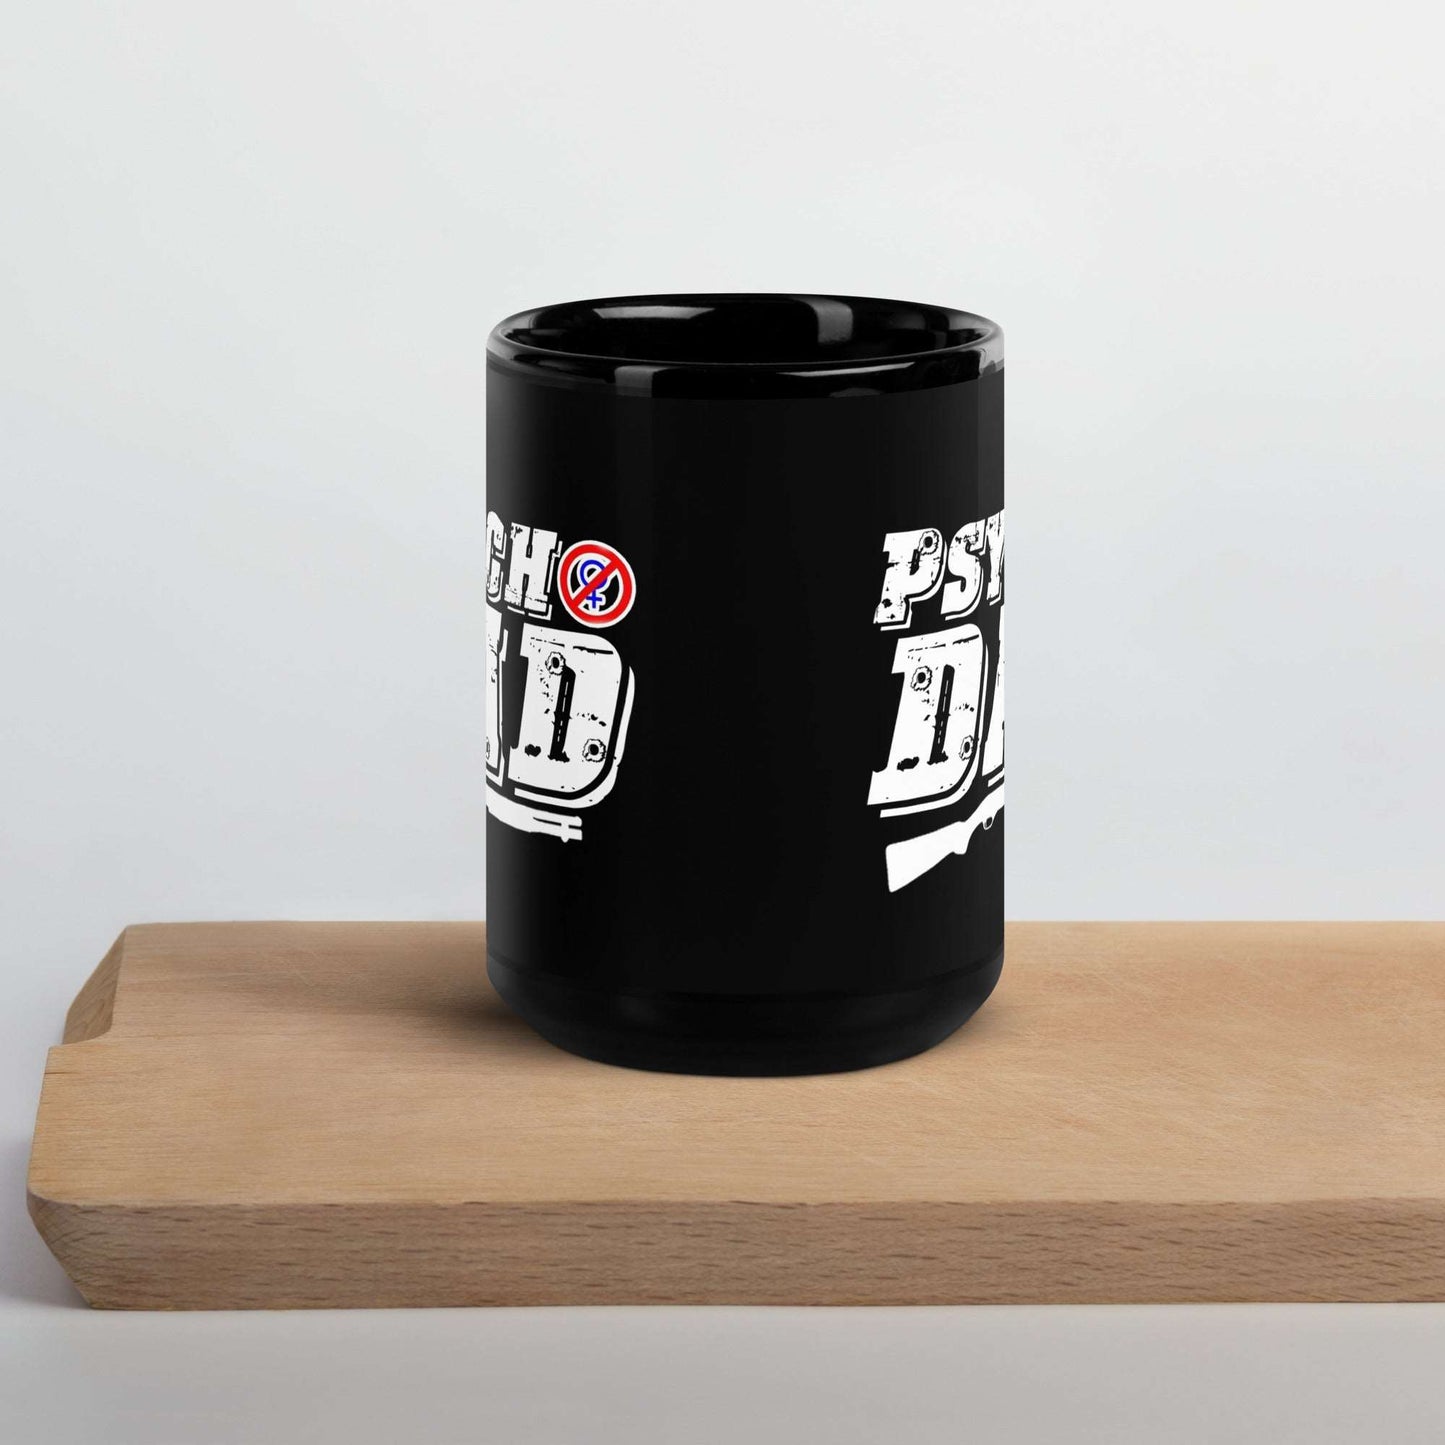 Psycho Dad's Mug - A Humorous and Nostalgic Cup for Married with Children Fans - thenightmareinc